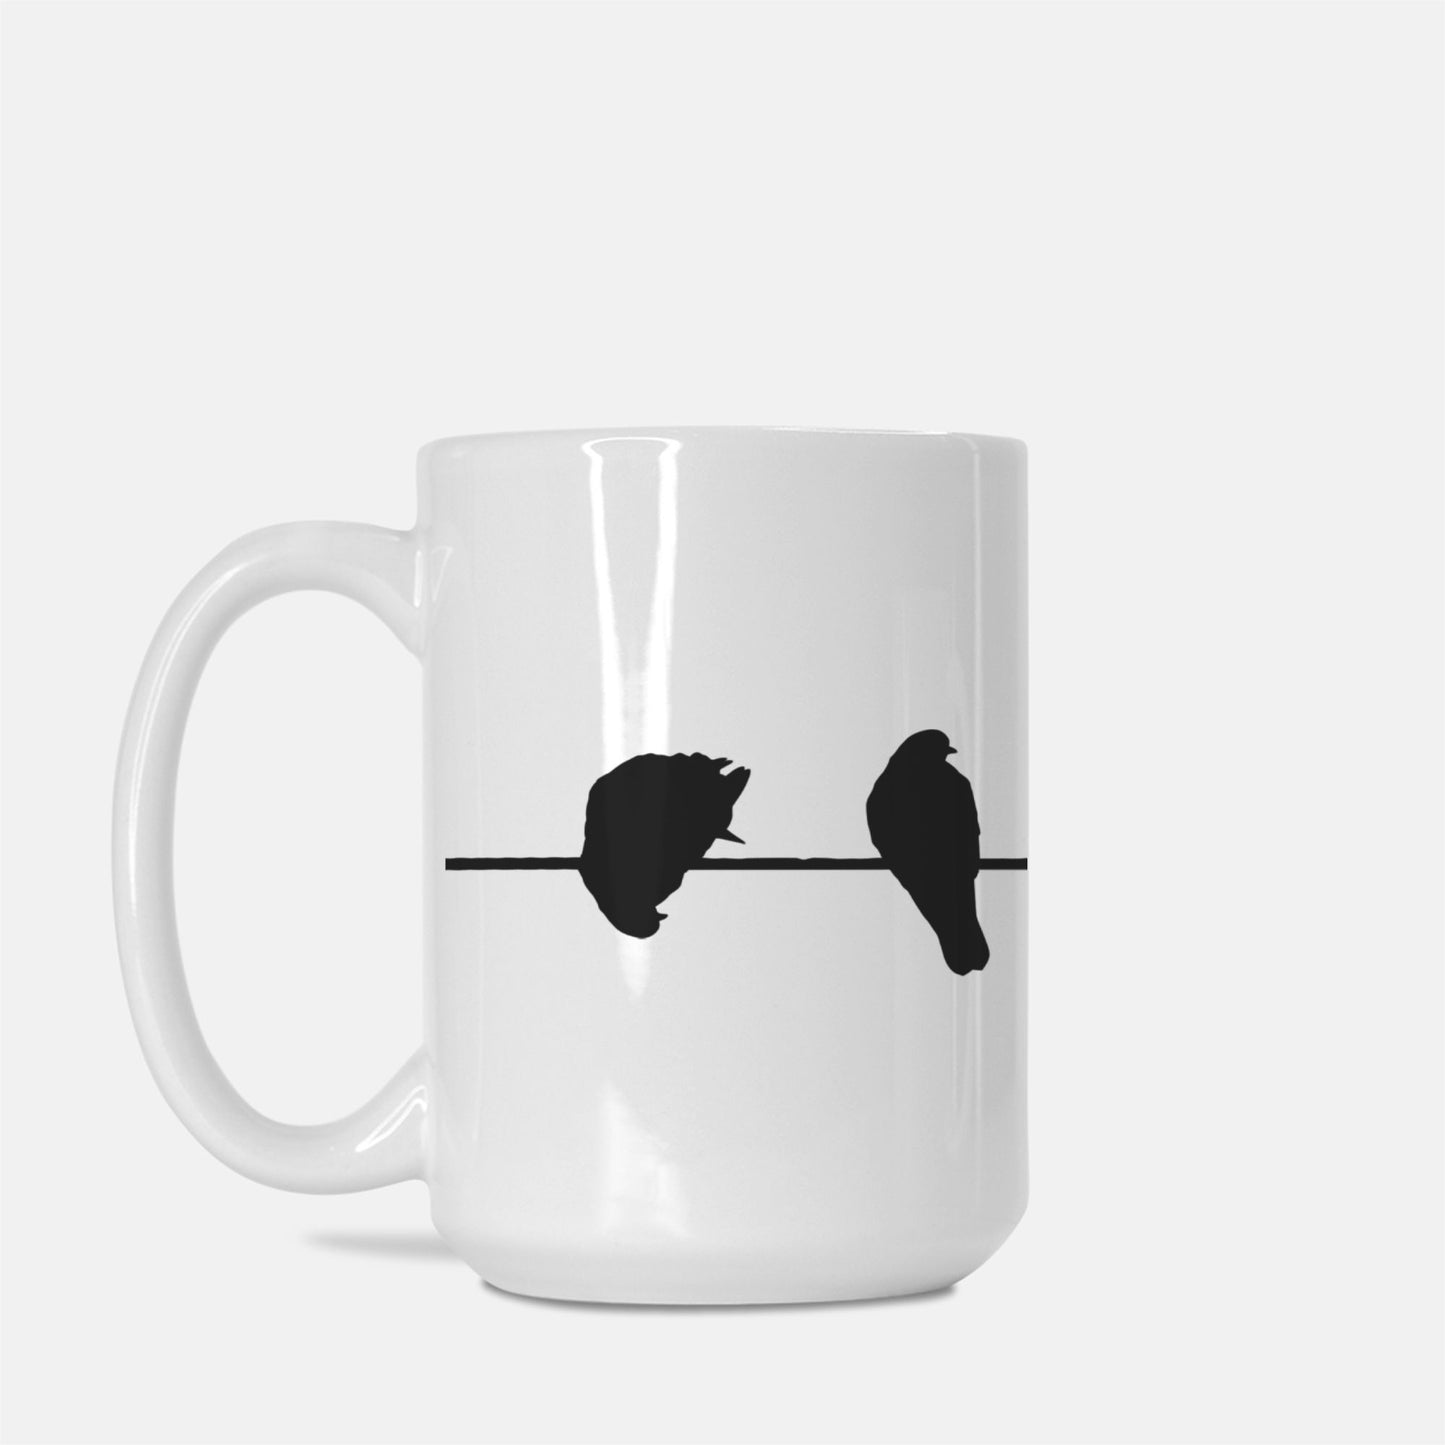 Birds On A Wire Mug Deluxe 15 oz.